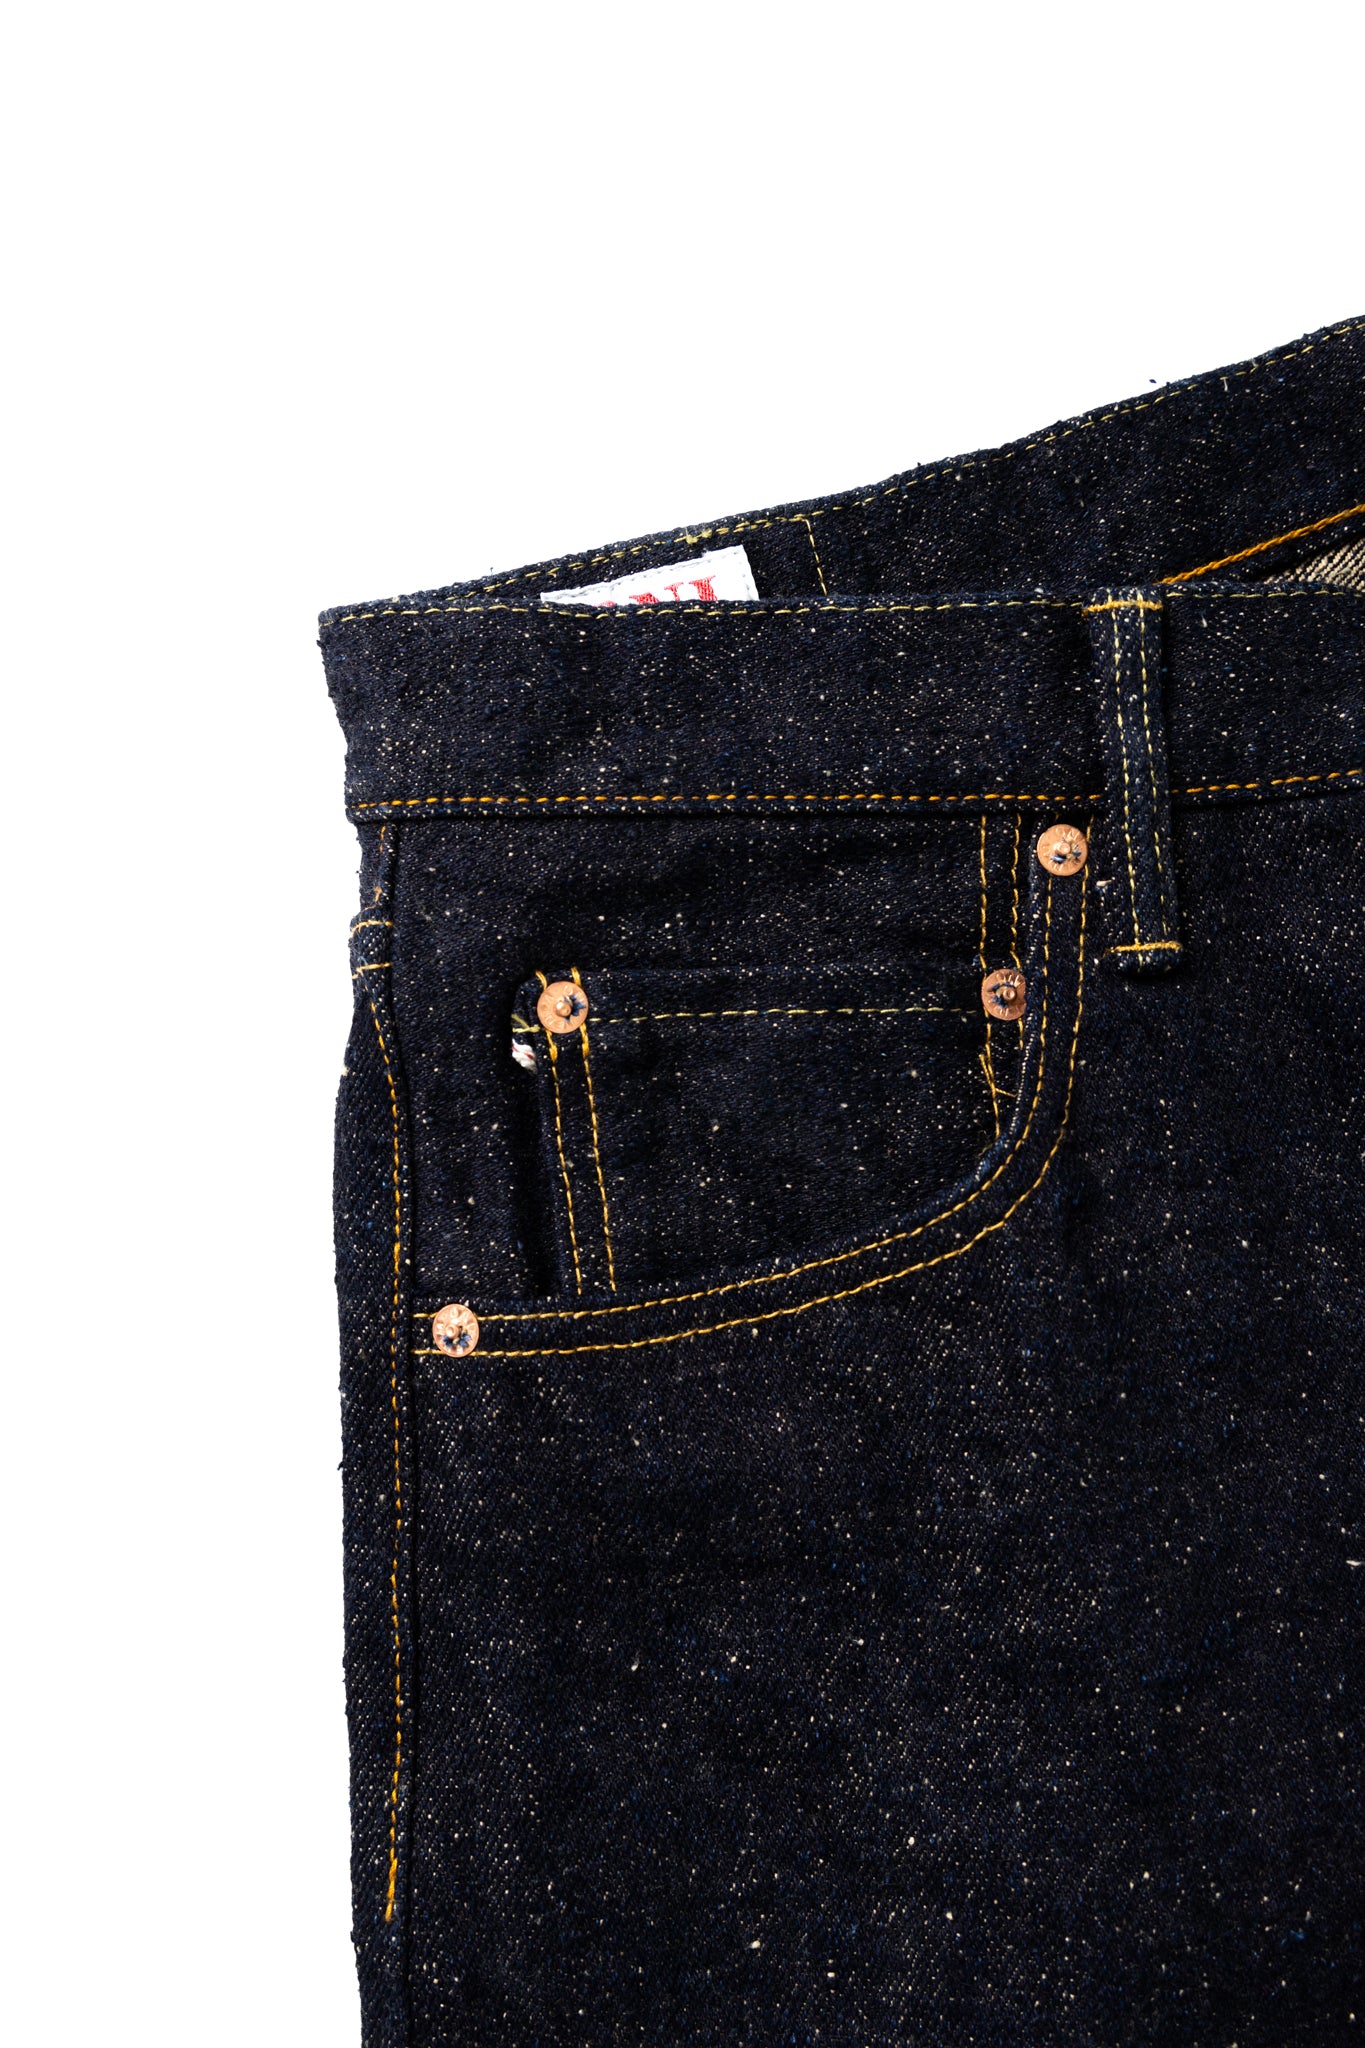 Oni Denim, legends of denim, new heavyweight selvedge- the Asphalt. Extreme slubbiness and neppy construction, weighing in at 20oz in a Relax Tapered fit. A dark indigo denim that is rugged and woven with low tension, using specially twisted thick yarns. Oni Original Japanese Selvedge denim featuring a cow leather patch. One Wash. Special edition for Blue in Green featuring plain rear pockets. Made in Japan. Model is 6'3 wearing a size 34. Unisex. 100% Cotton. 